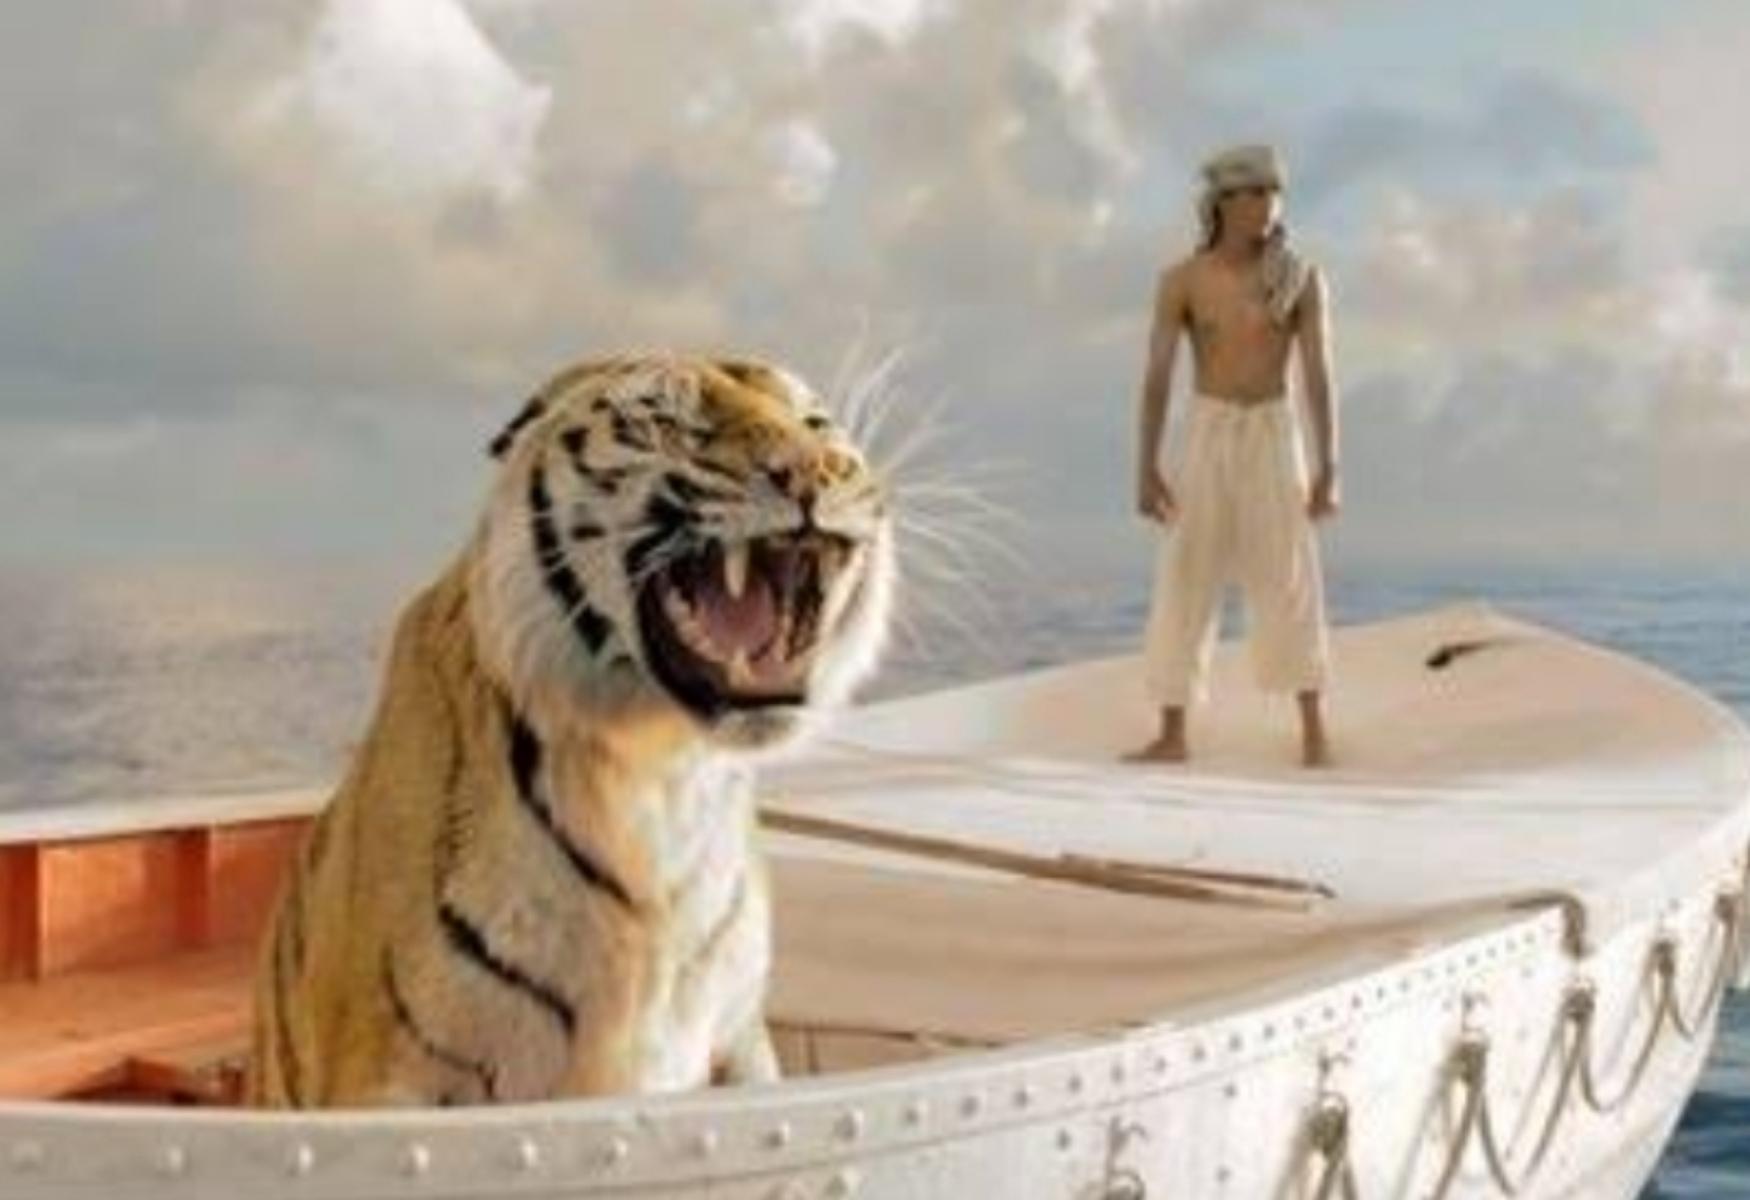 An inspiration from "Life of Pi"